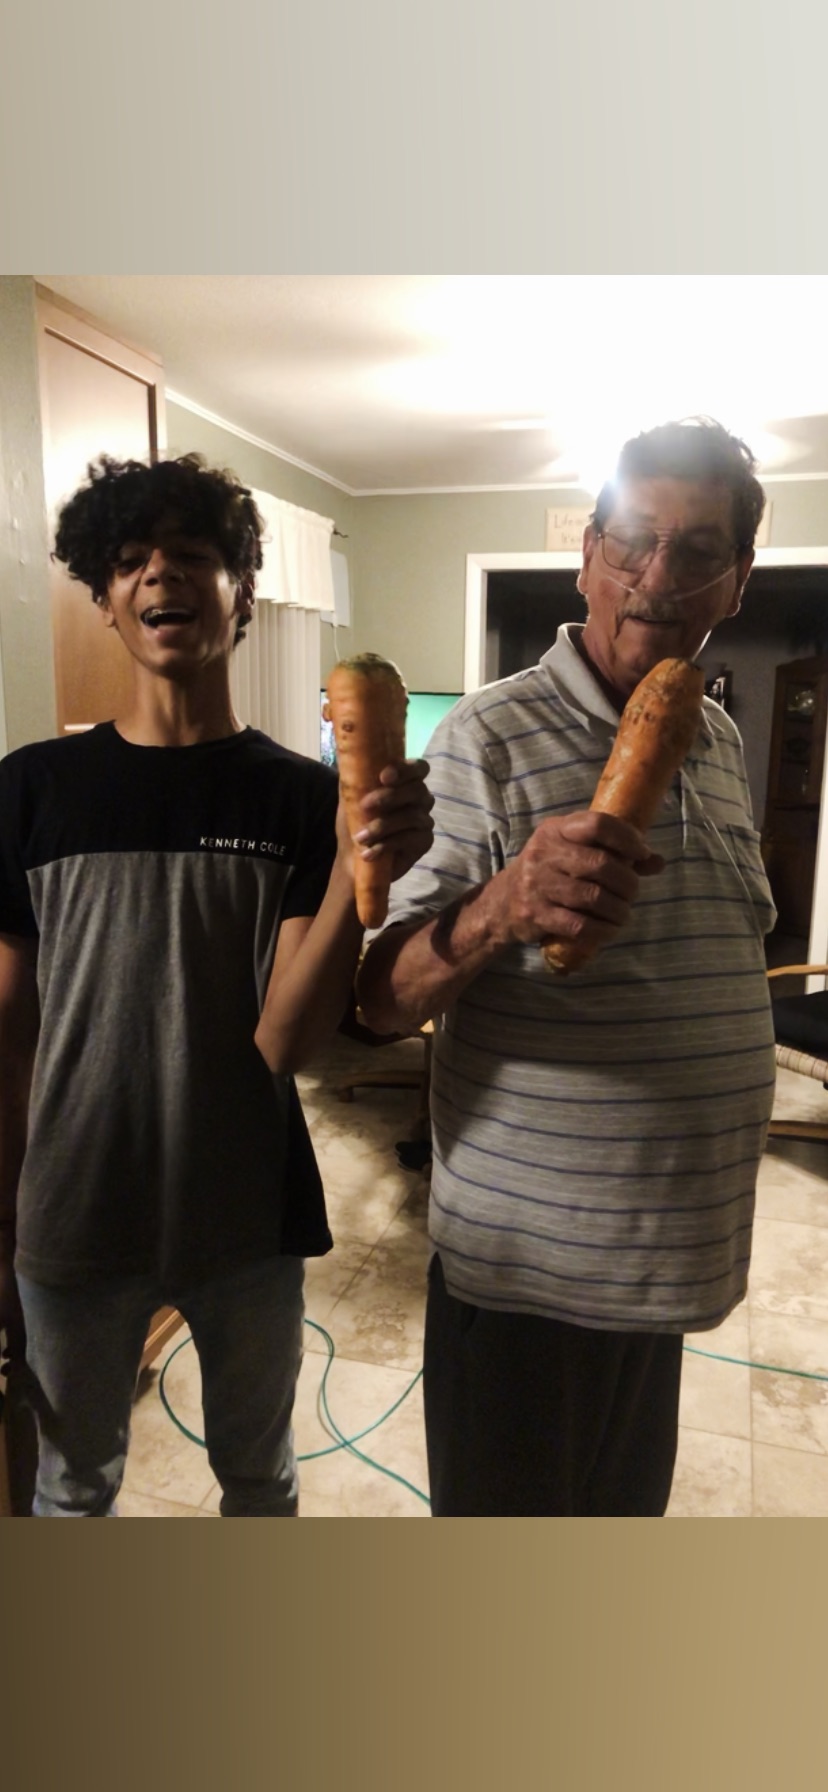 Caleb and dad having fun with giant carrots.